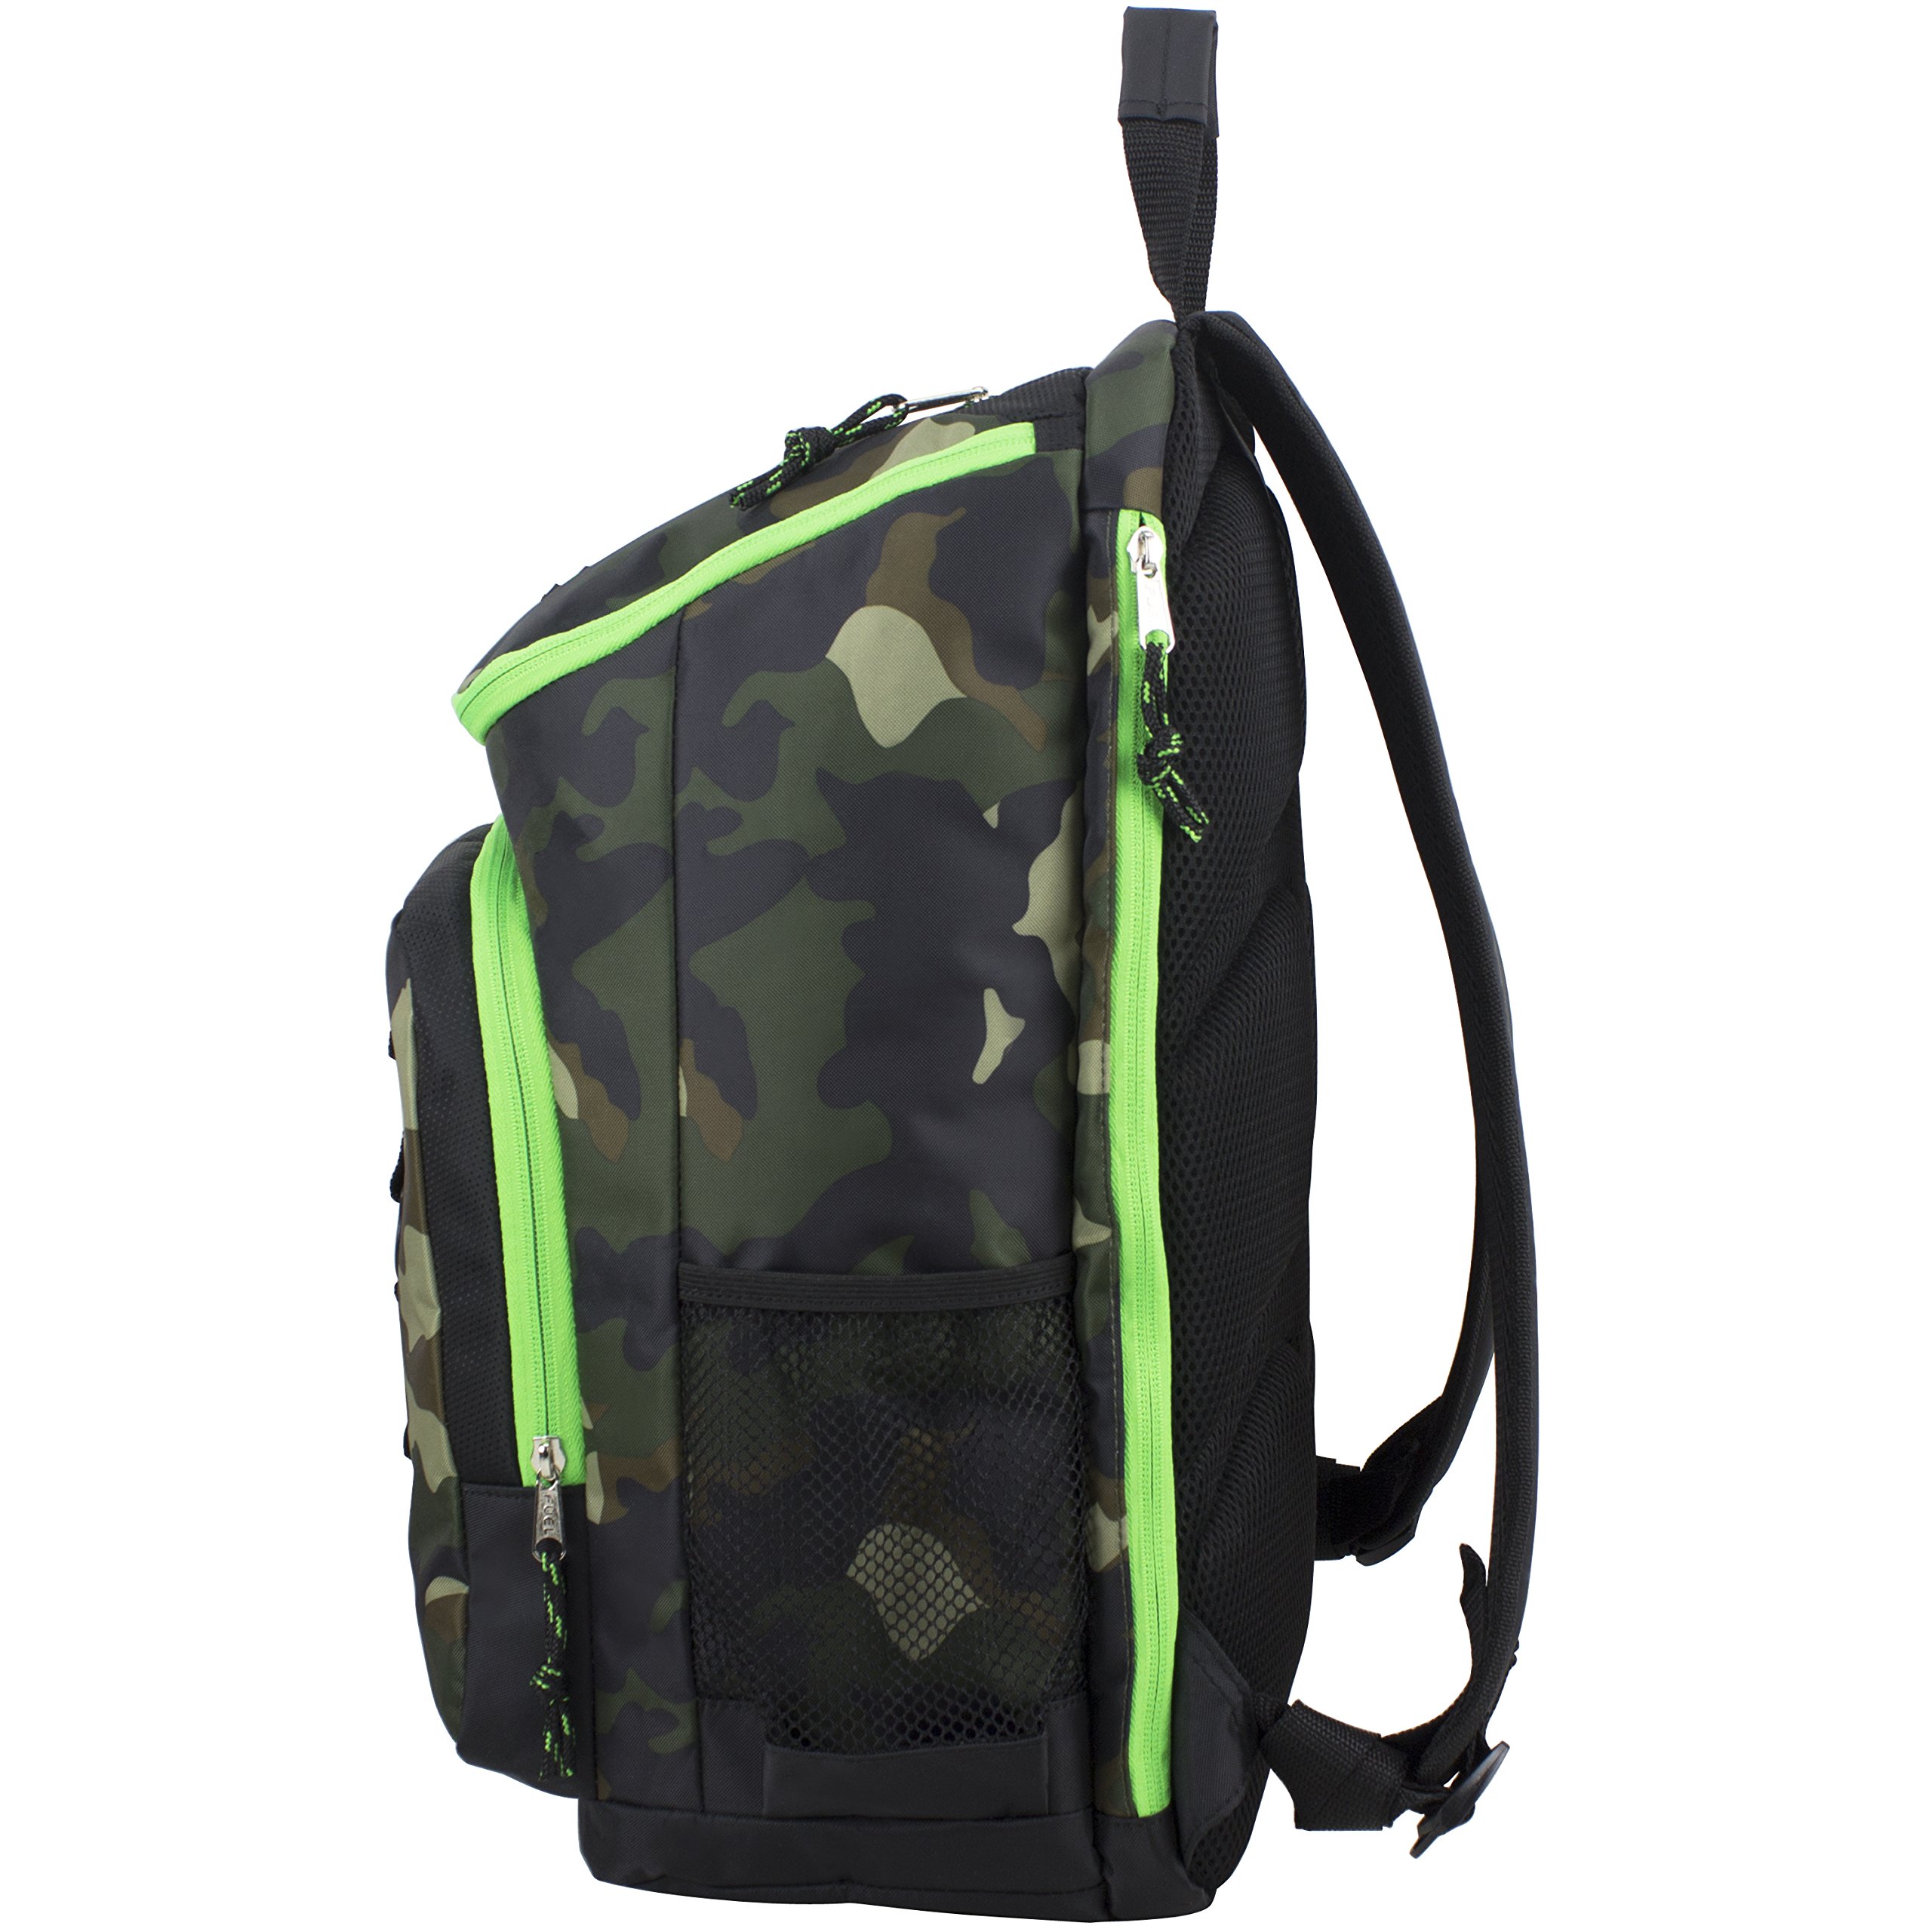 FUEL Top Load Multipurpose Backpack, Extra Large Main Compartment w/Easy Access, Padded Back w/Adjustable Comfort Straps, Front Molle Loops - Army Camo